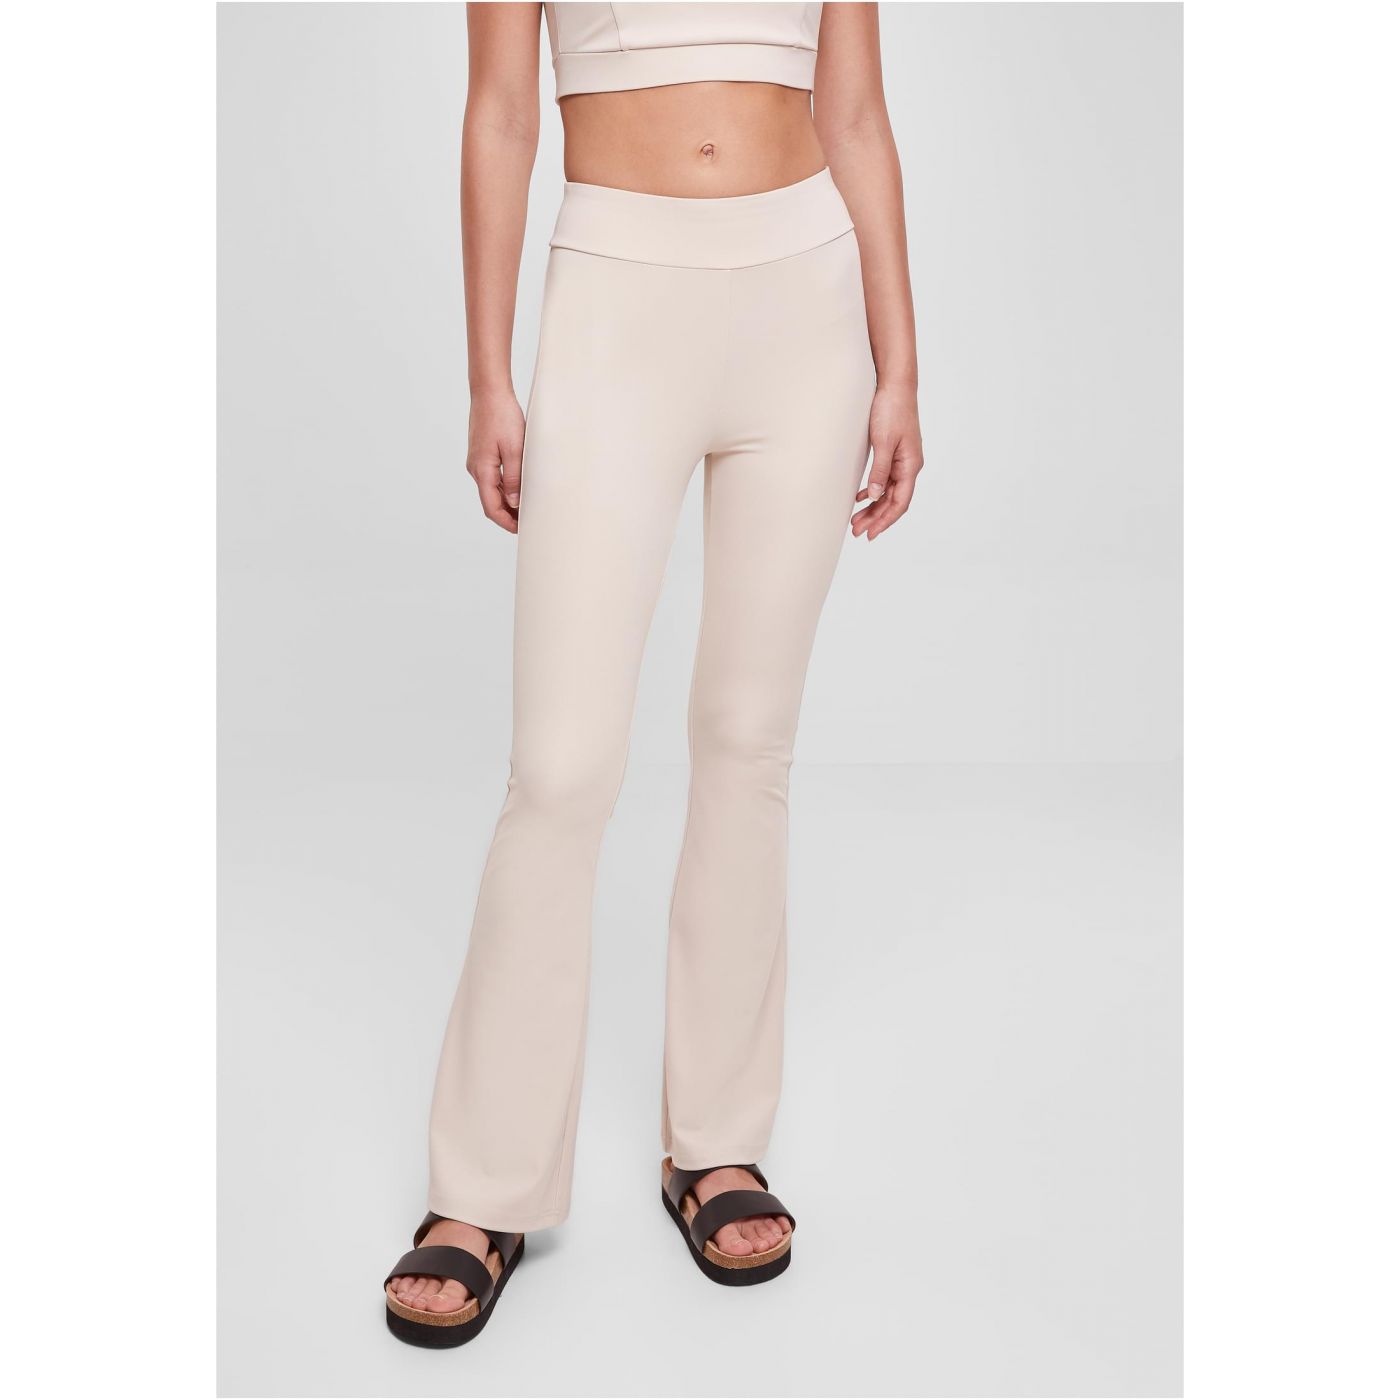 Women's Recycled High-waisted Leggings Made Of Soft Seagrass